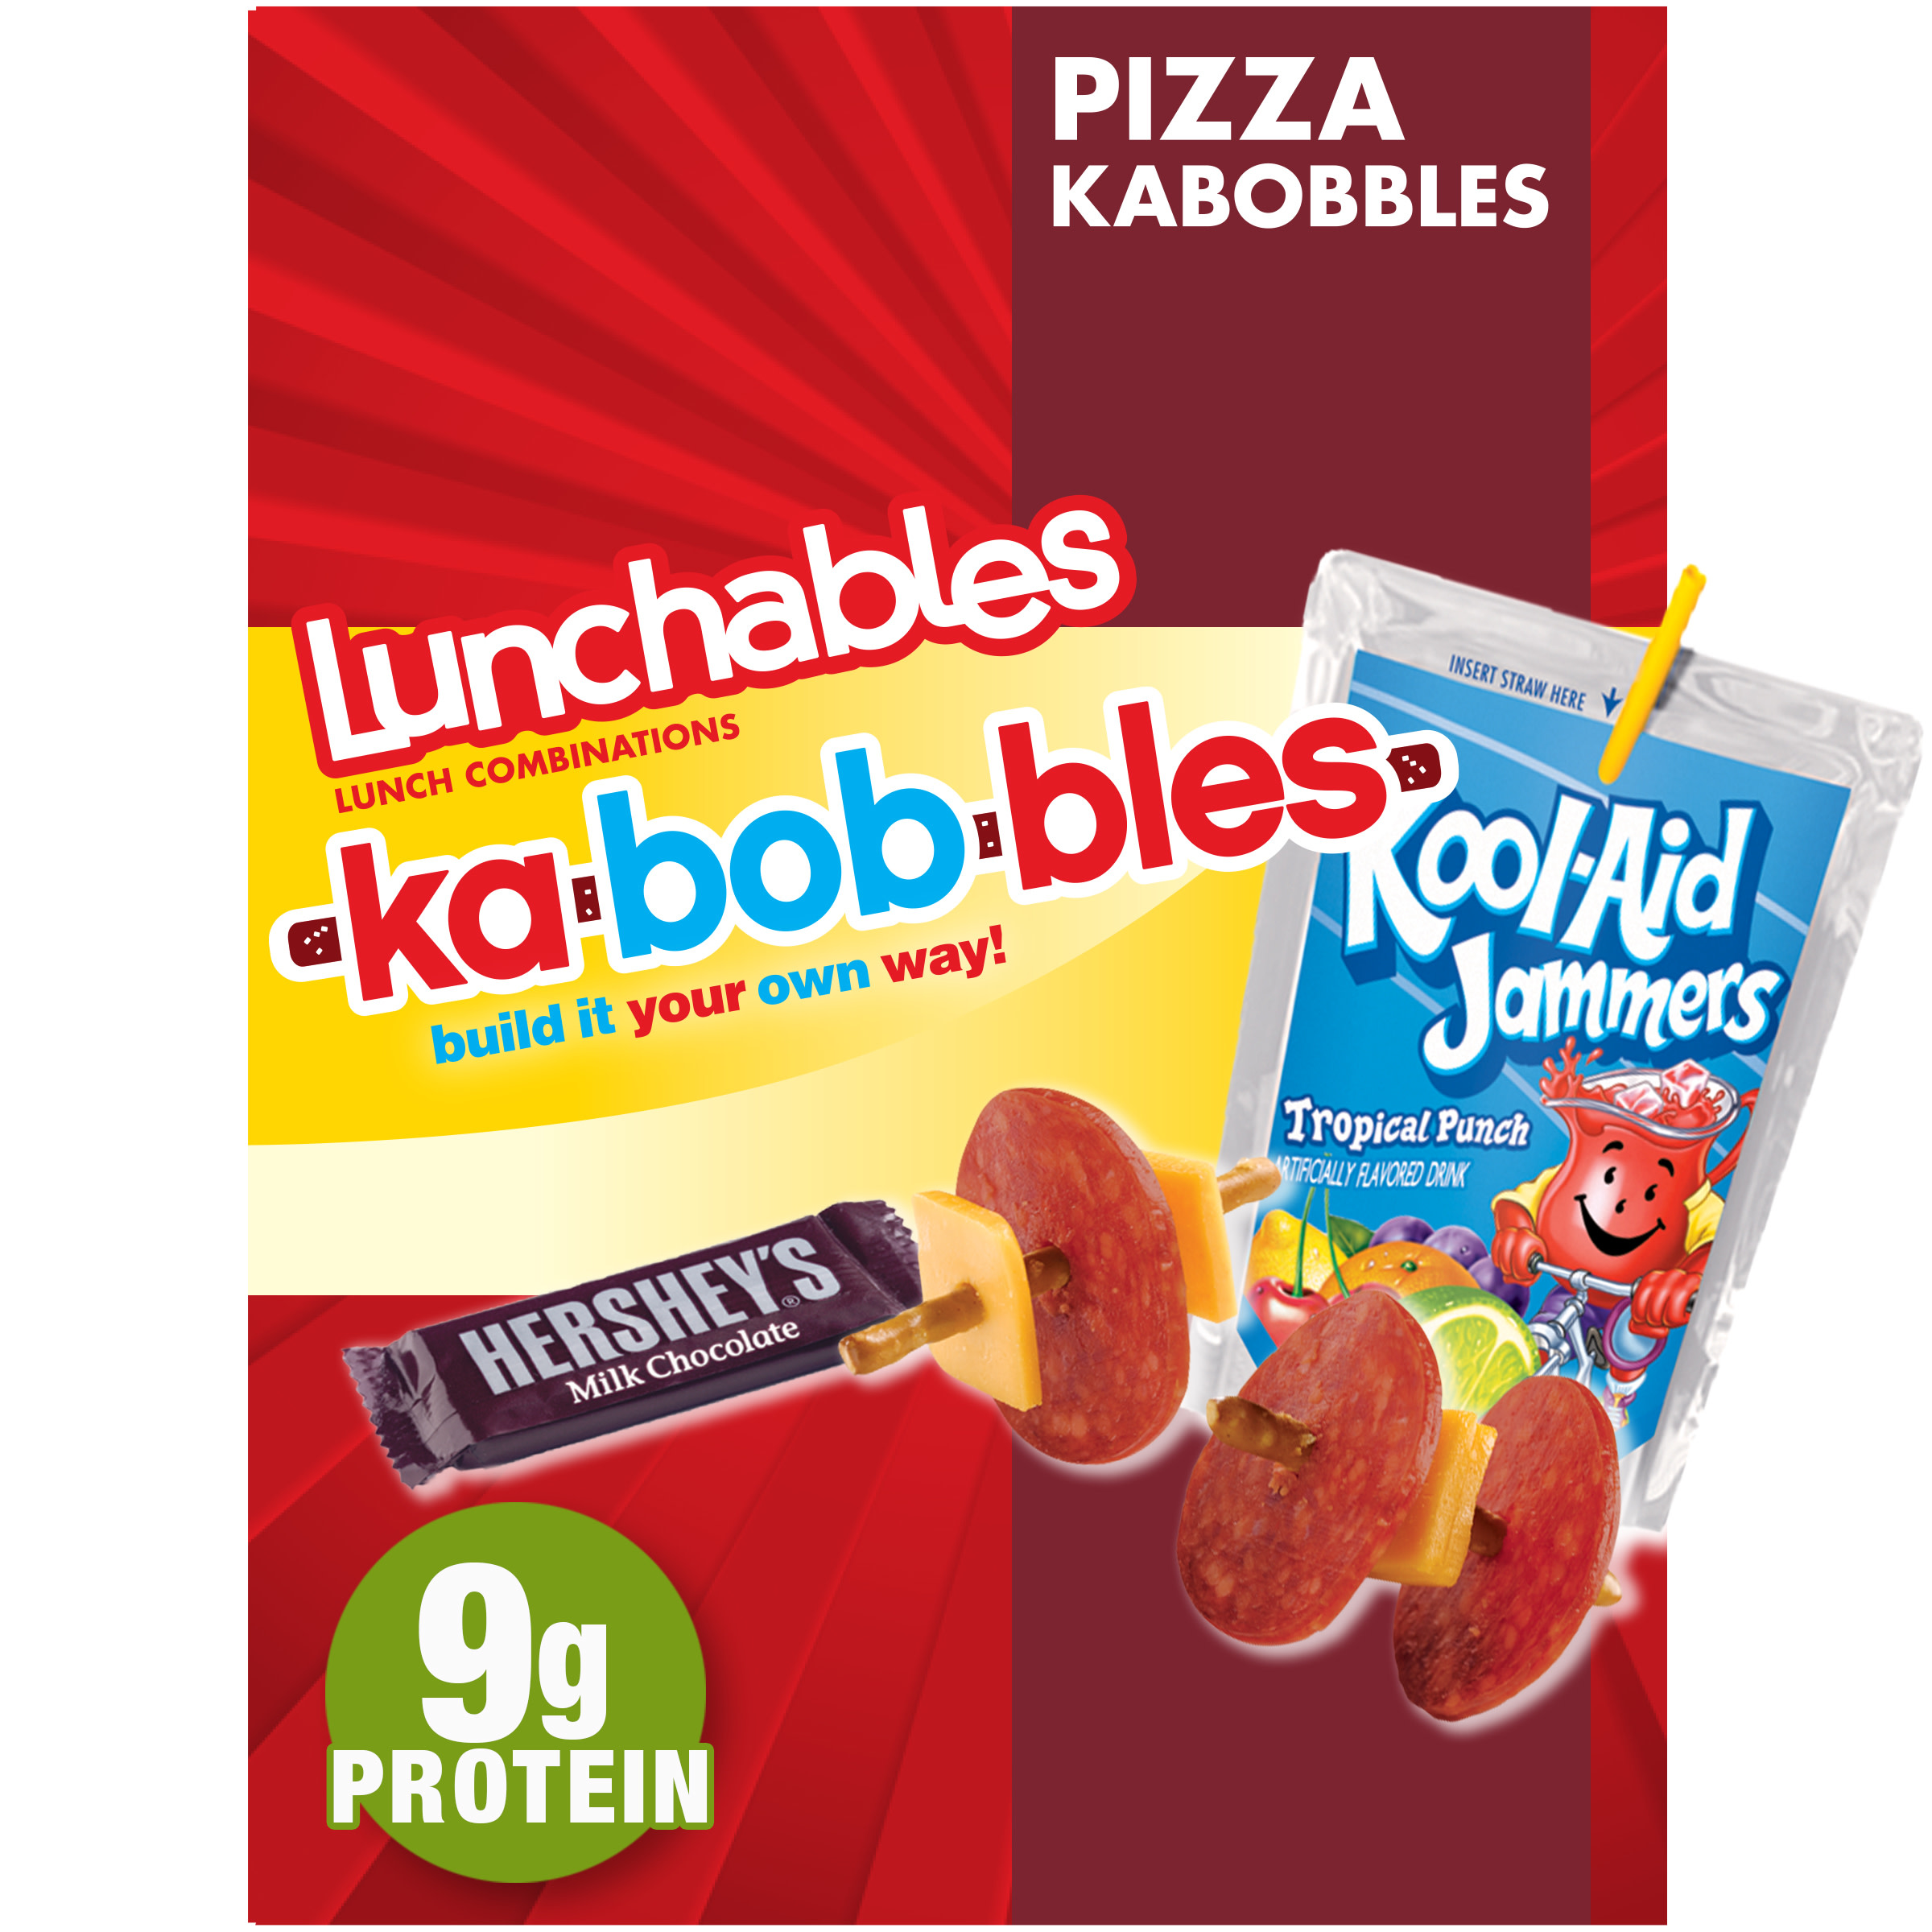 Lunchables Pepperoni Kabobbles Meal Kit with American Cheese, Pretzel Sticks, Kool-Aid Jammers Tropical Punch Drink & Hershey's Bar, 8 oz Box - image 1 of 14